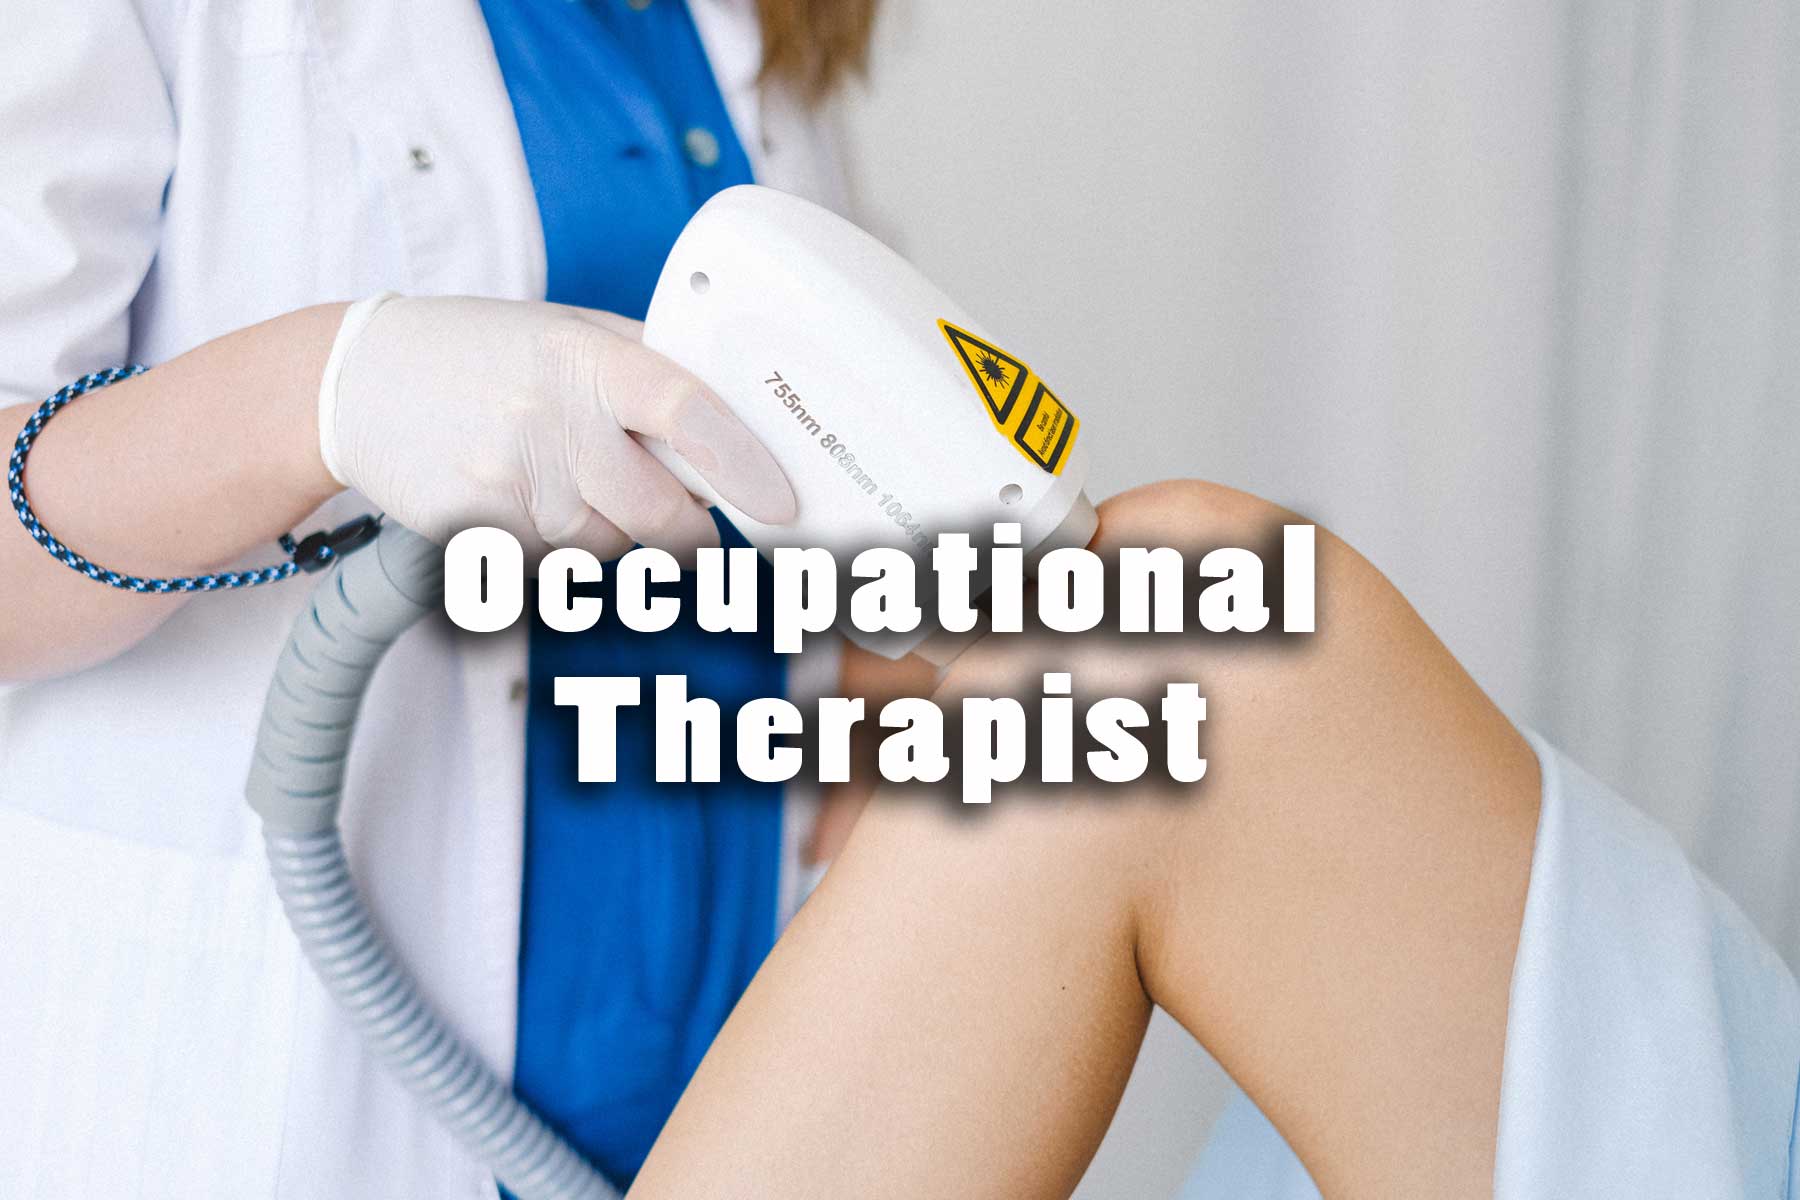 Occupational Therapist Objective Questions